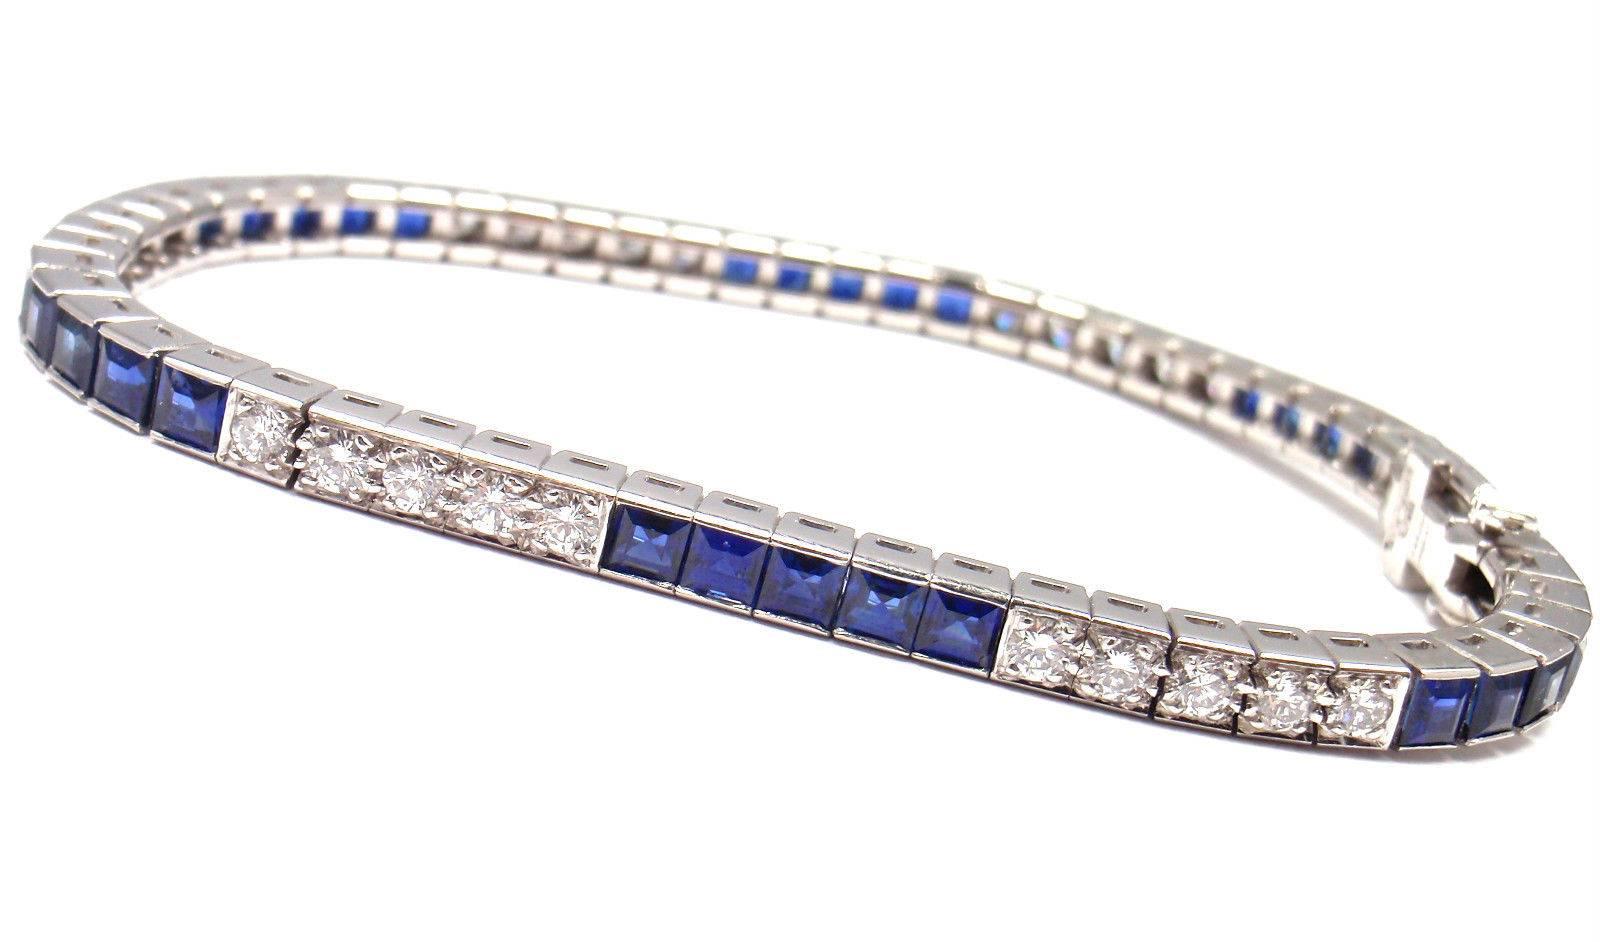 Irid Platinum Diamond And  Sapphire Line Tennis Bracelet by Cartier. 
This bracelet comes with Cartier paper and Cartier box.
With 30 round brilliant cut diamonds VVS1 clarity, E color 
total weight approx. 1.58ct
30 square cut sapphires total